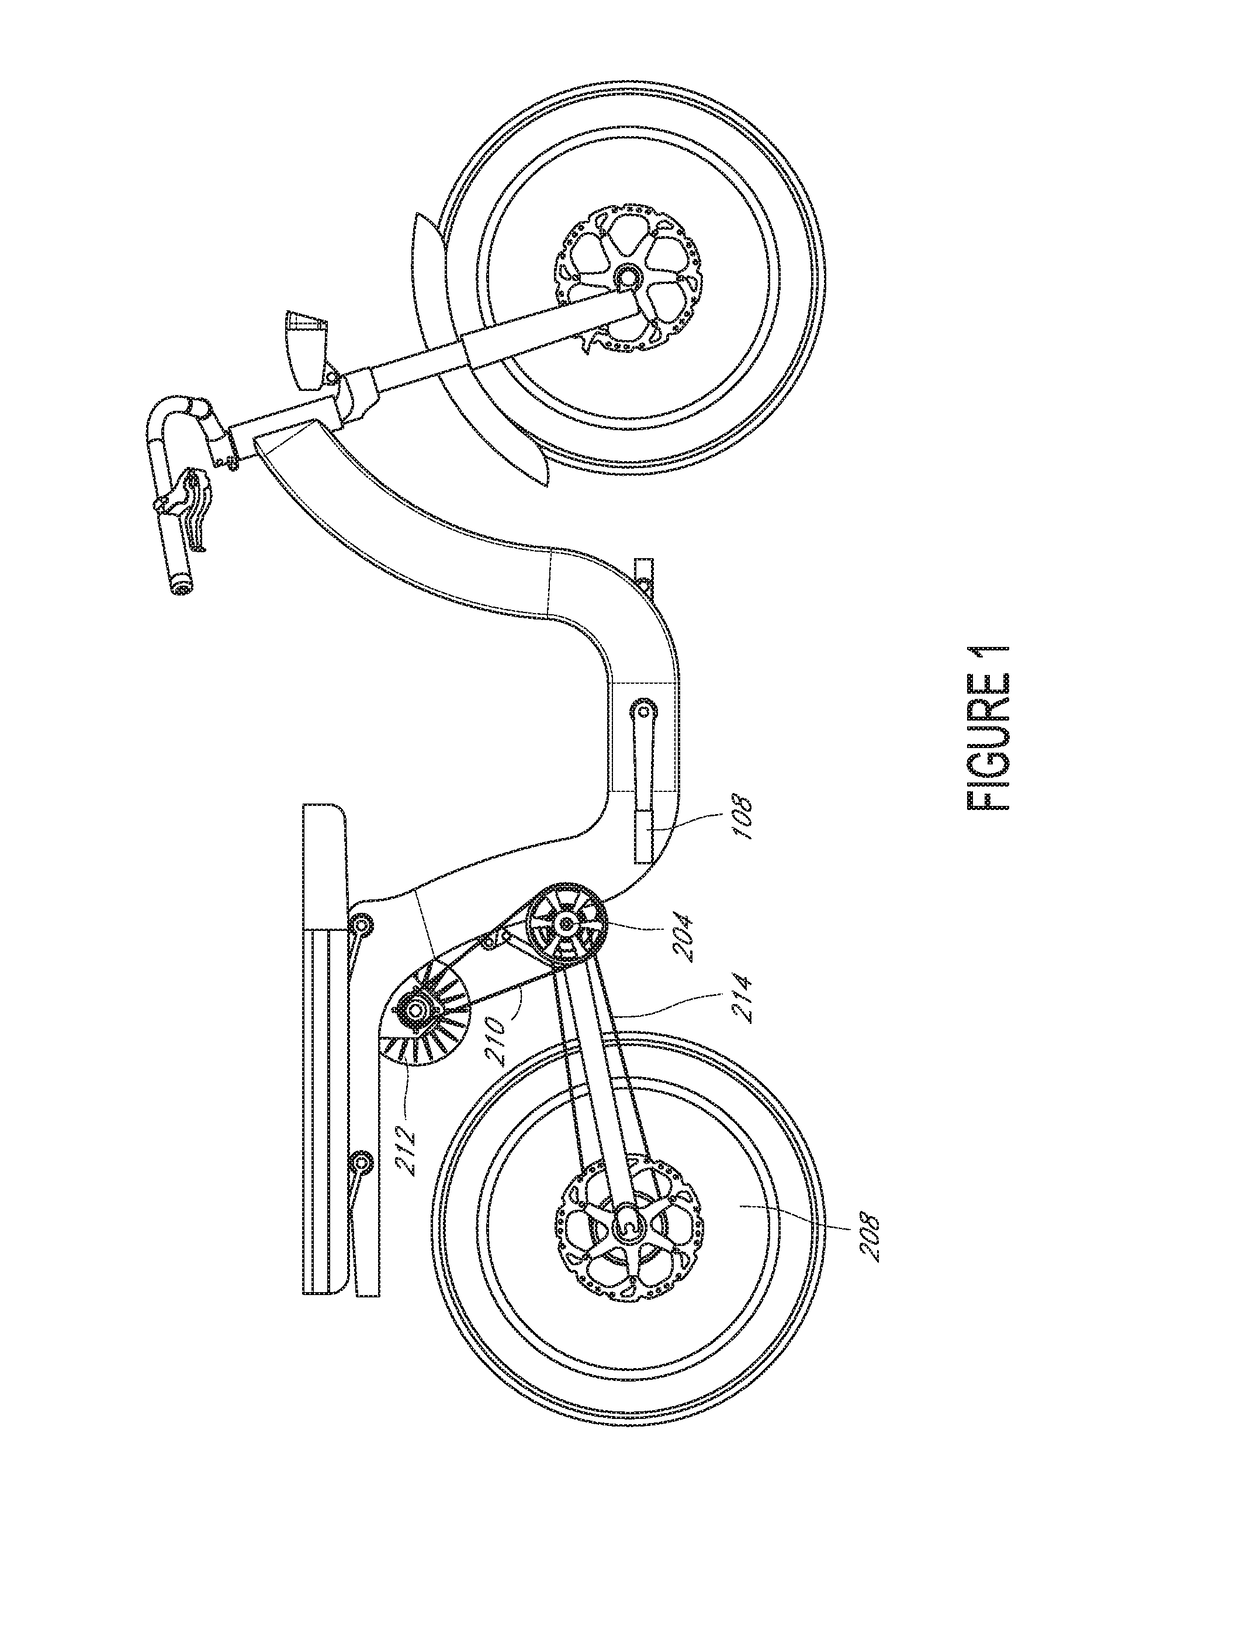 Electric bicycle transmission systems, methods, and devices